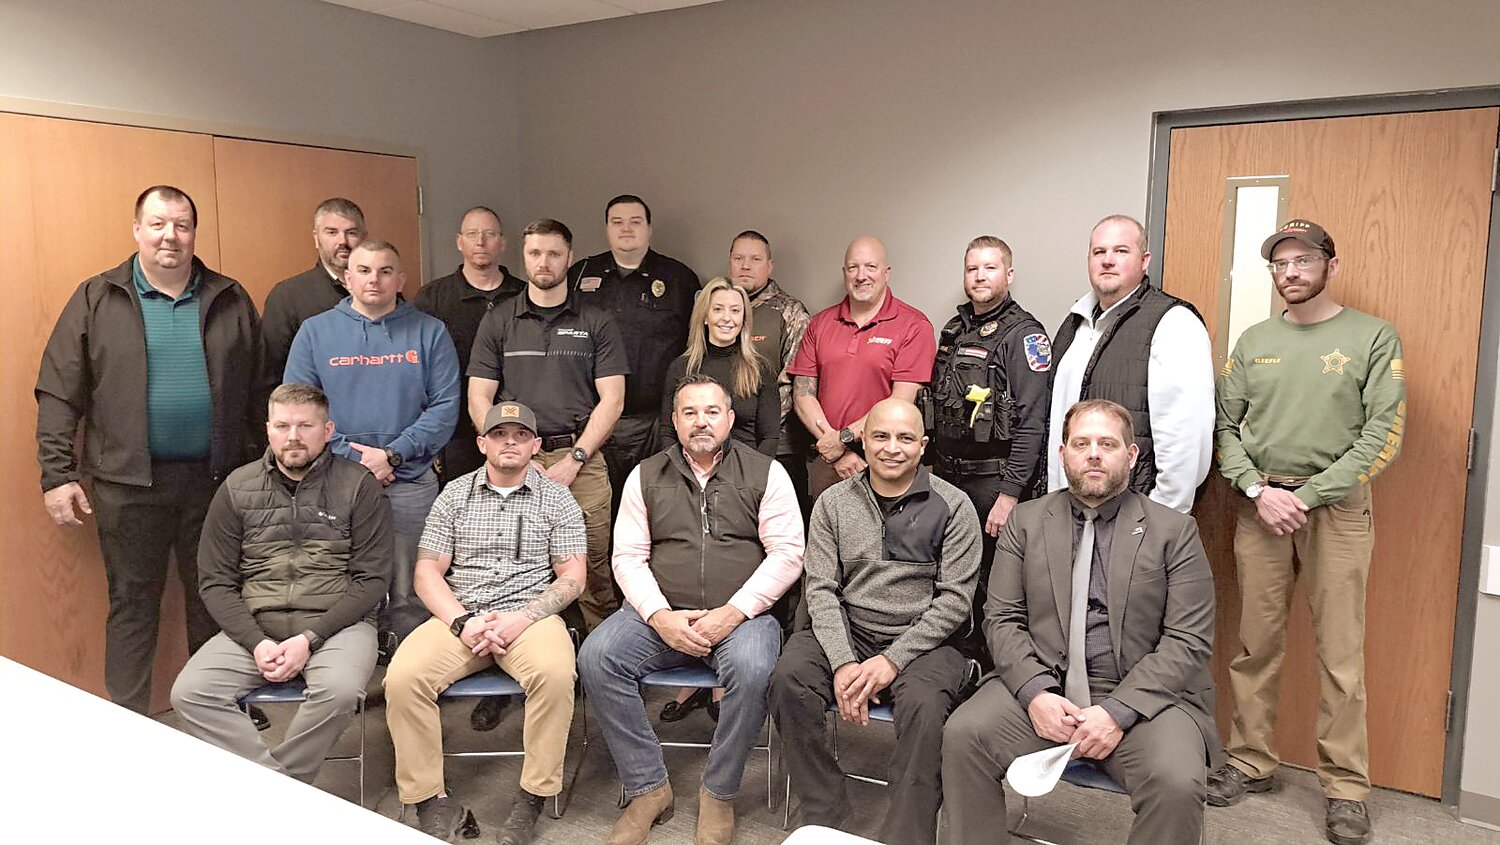 Investigative Coordinator for West Central Metropolitan Enforcement Group (WCMEG), Rob Walensky (Standing - far left), is pictured here with the dedicated law enforcers from the six counties that make up the WCMEG: La Crosse, Monroe, Vernon, Trempealeau, Jackson, and Crawford. Walensky answers to the WCMEG Board, which consists of the Sheriff's from the six counties mentioned. While not mandatory to join the WCMEG, great information is gleaned from sharing knowledge on criminal cases, between all police departments and Sheriff’s offices, regardless of size. Herald photo by Benny Mailman.